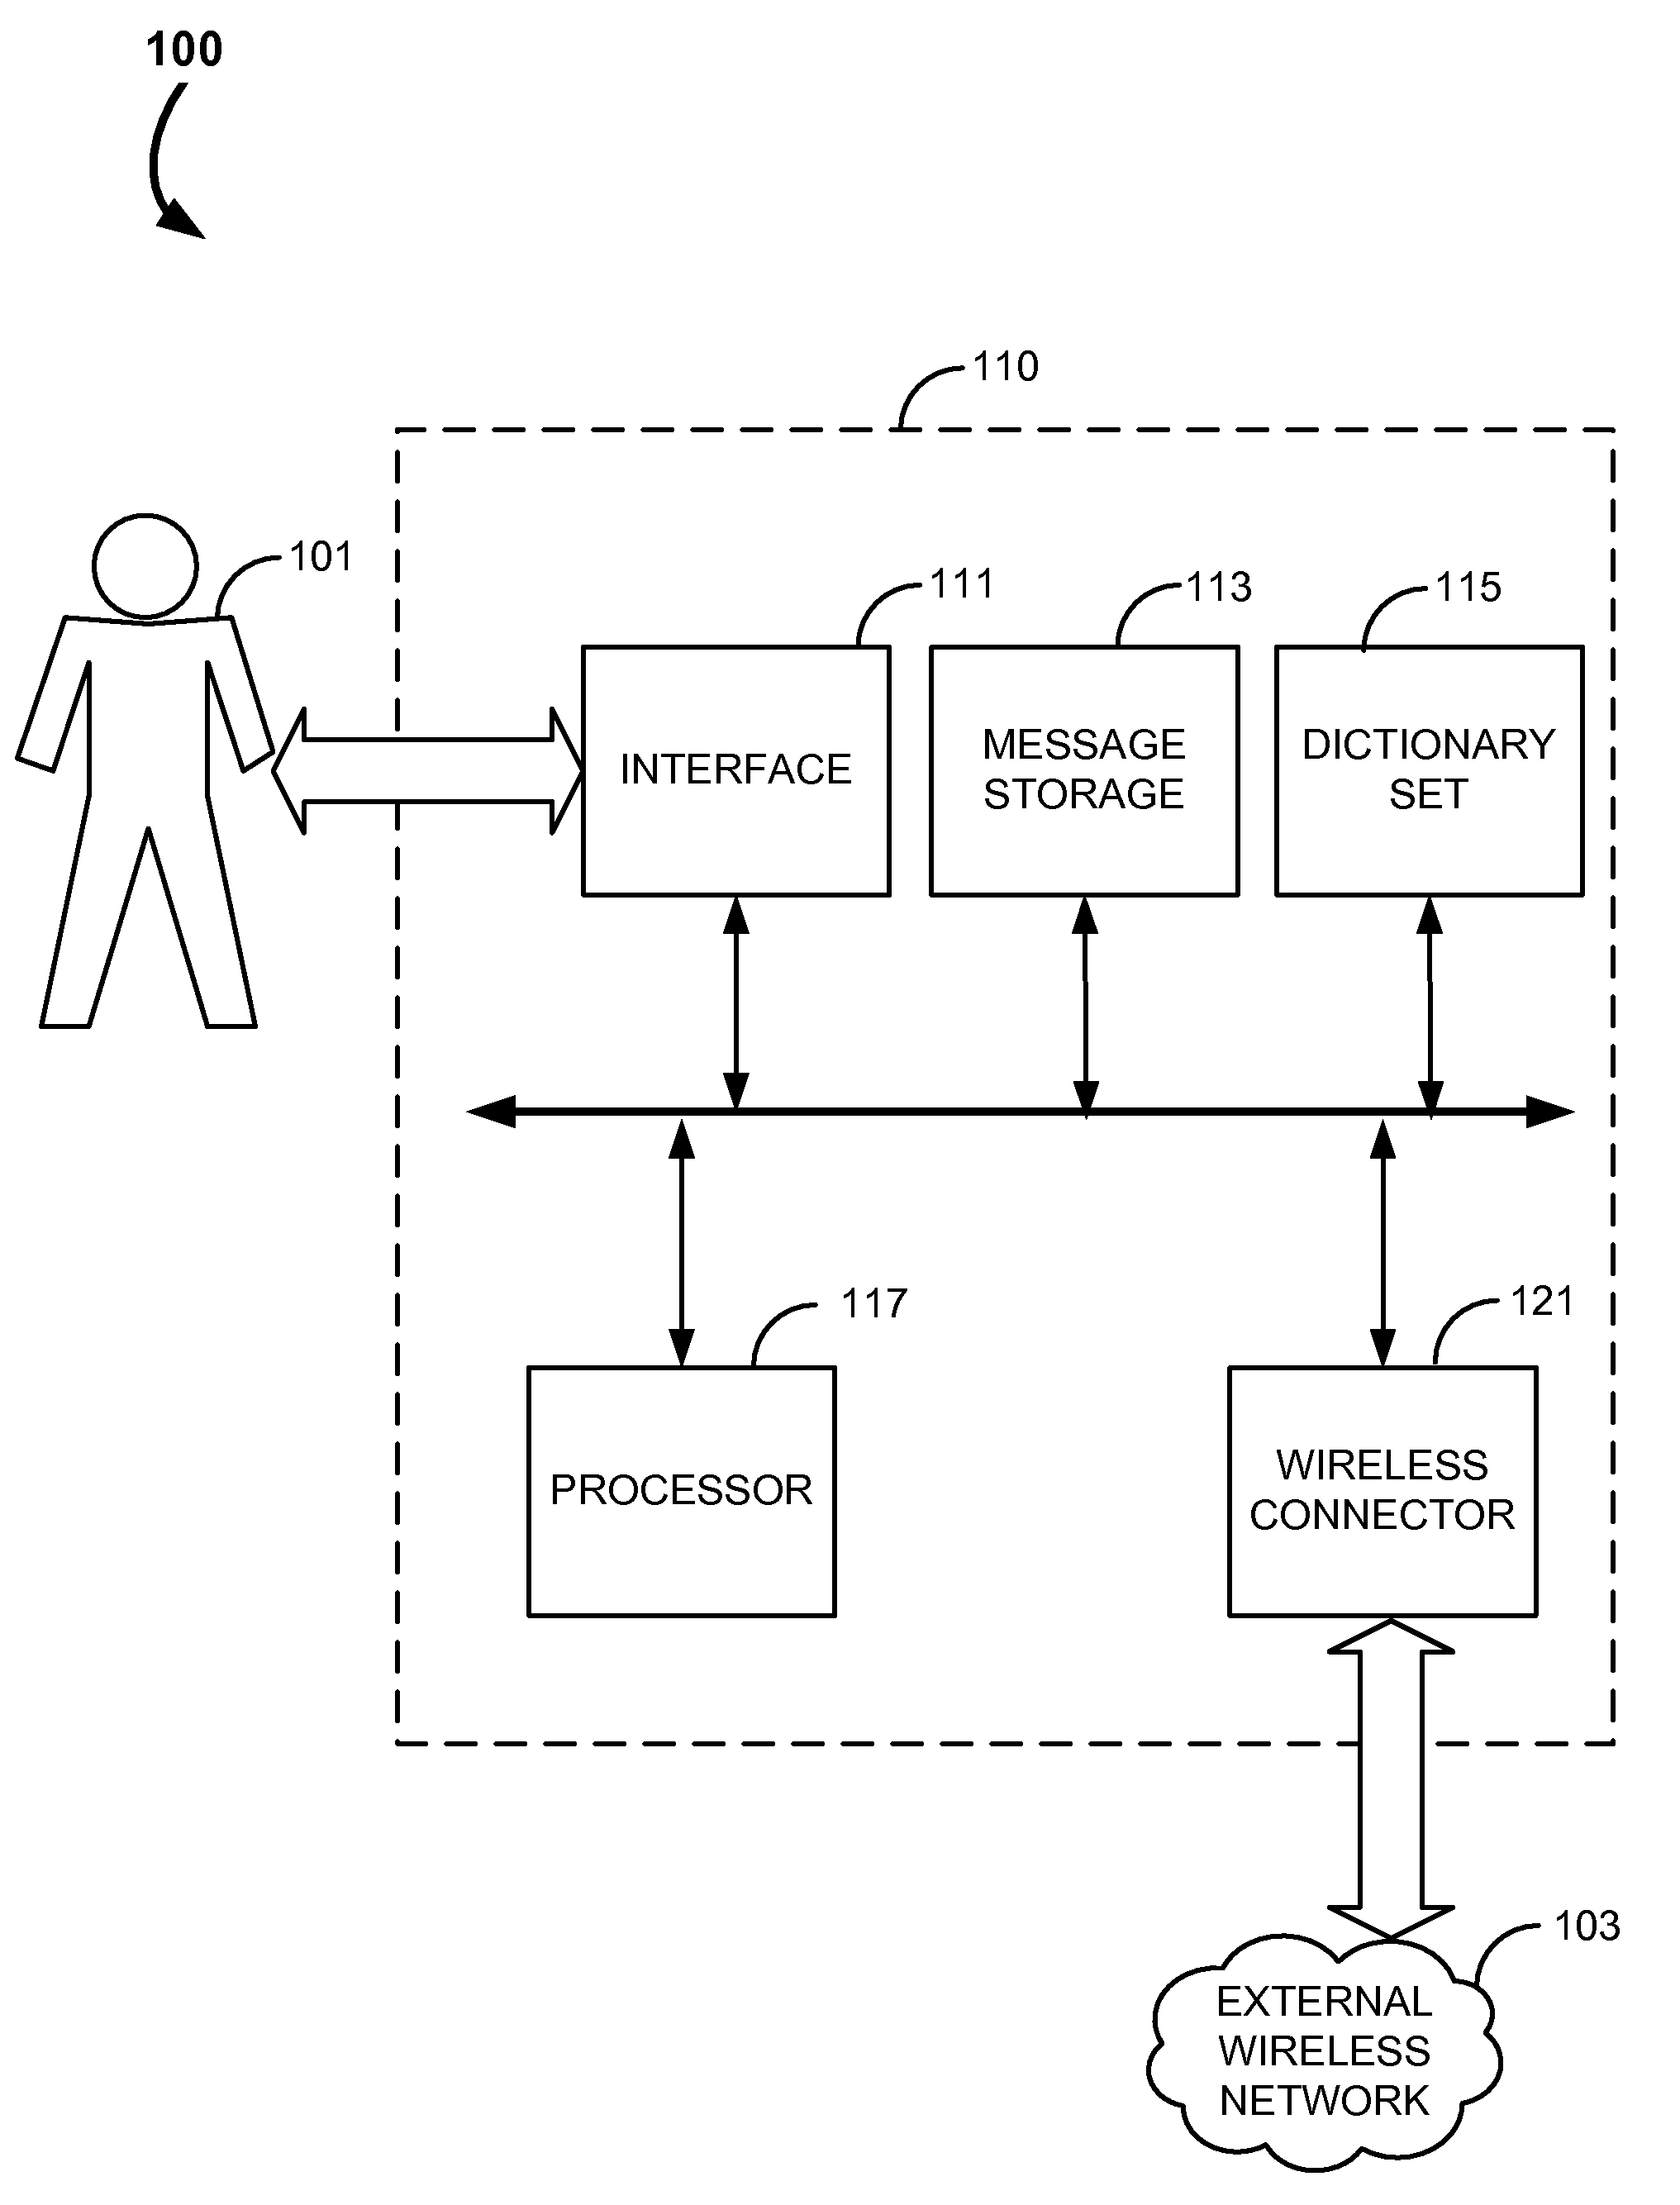 Systems and Methods for an Automated Personalized Dictionary Generator for Portable Devices